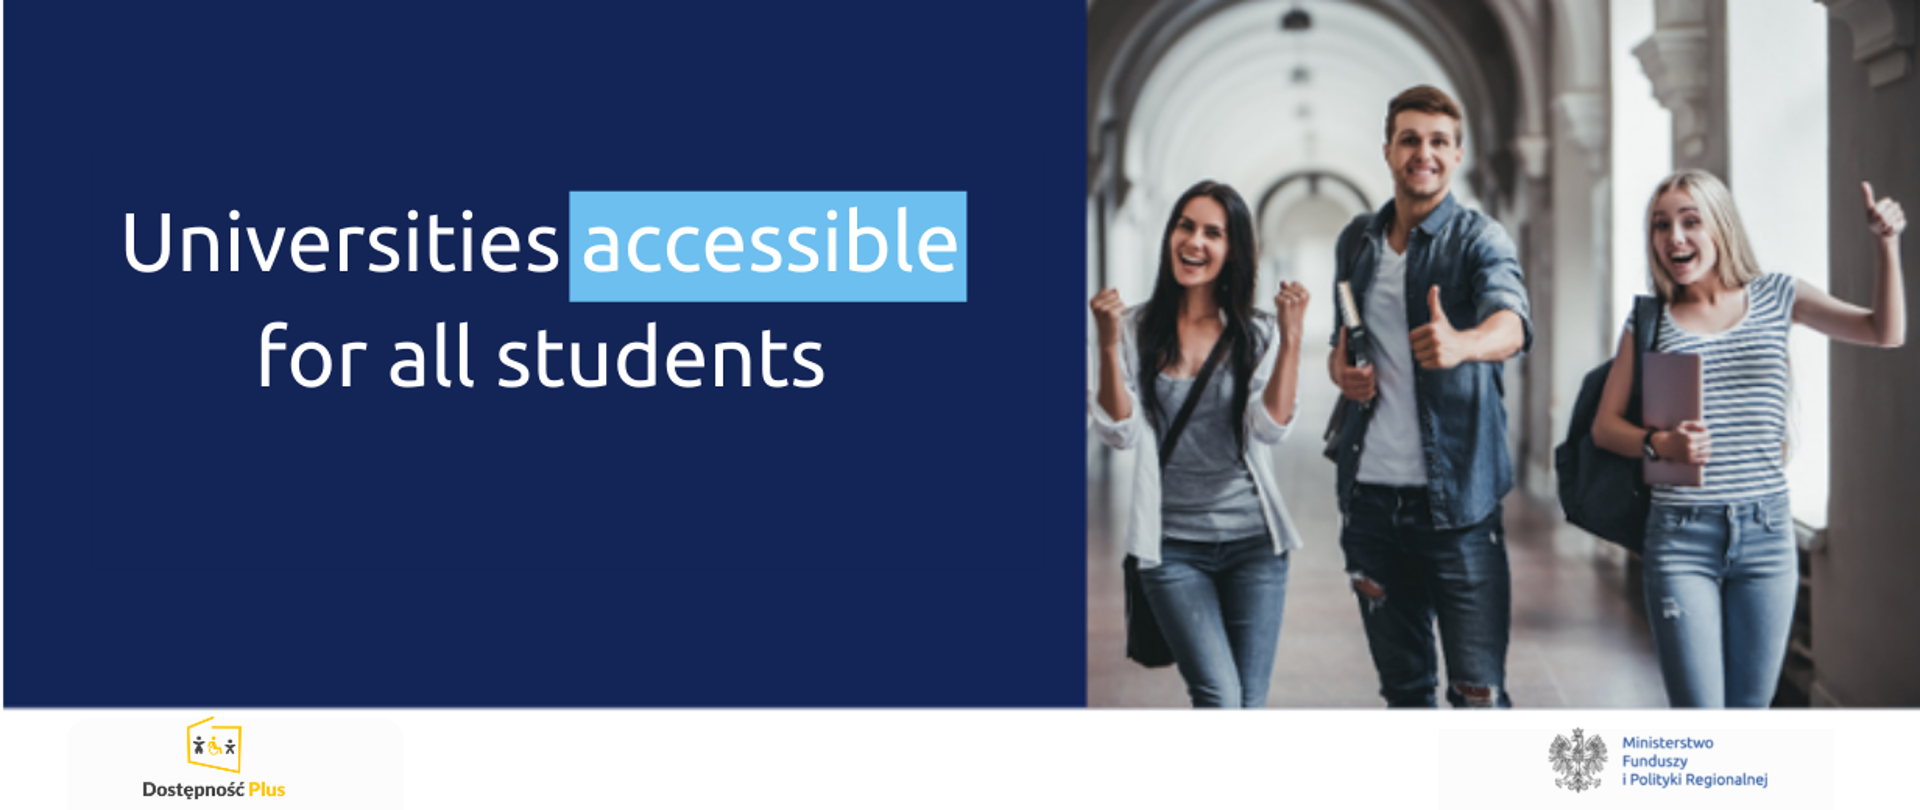 Universities accessible for all students